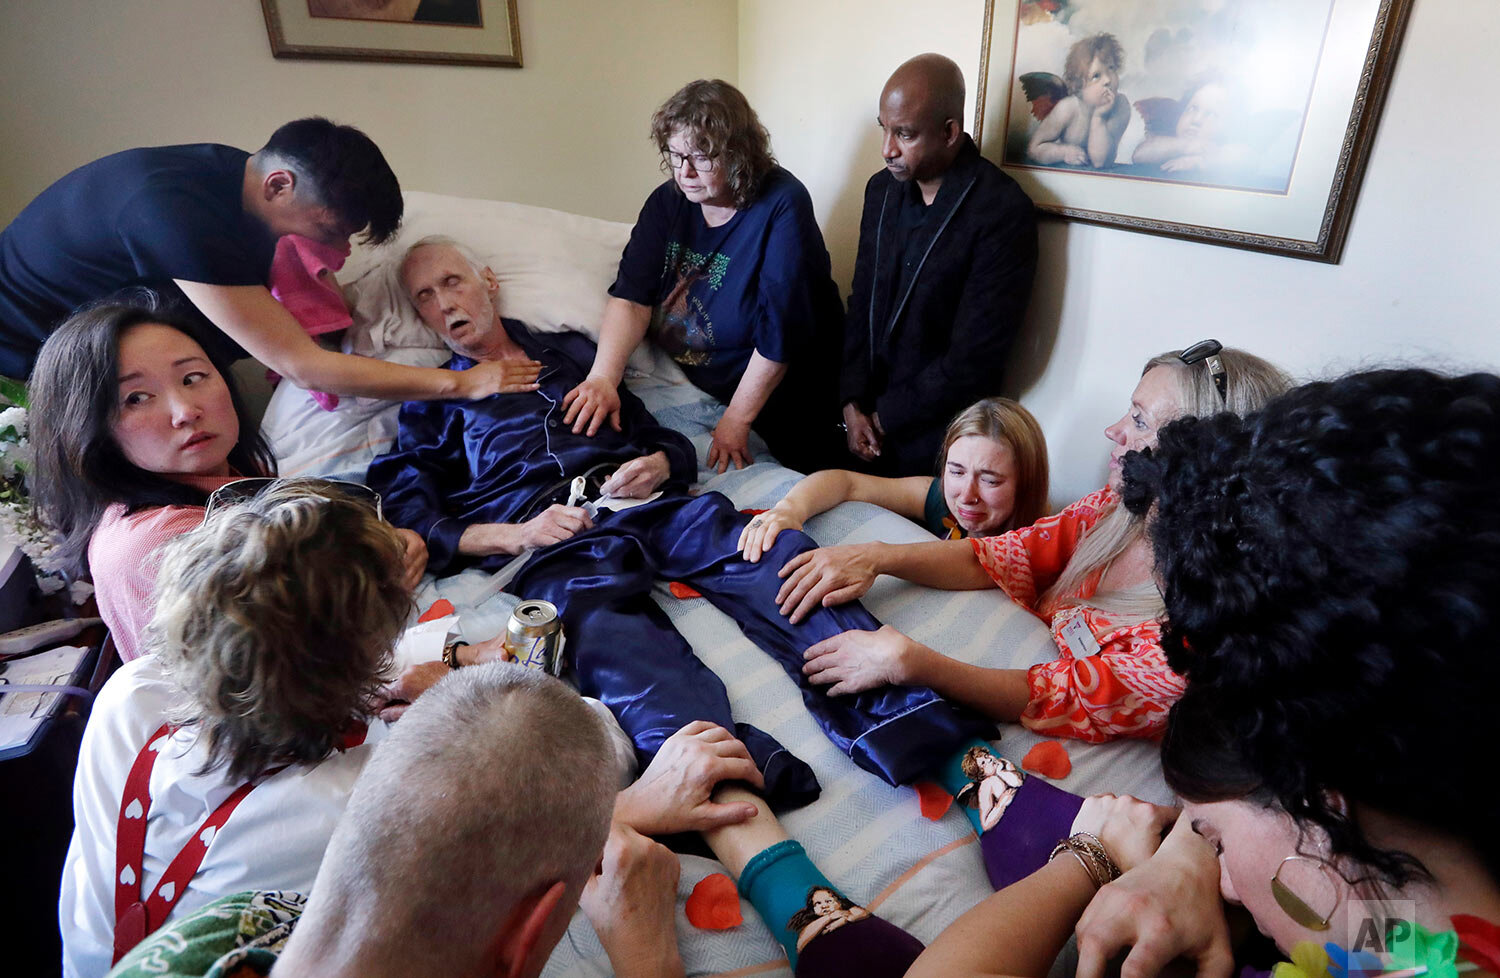  Robert Fuller lies unconscious after plunging drugs that will end his life into his feeding tube as his husband, Reese Baxter, upper left, and friends hold him, in Seattle on May 10, 2019. Fuller was one of about 1,200 people who have used Washingto